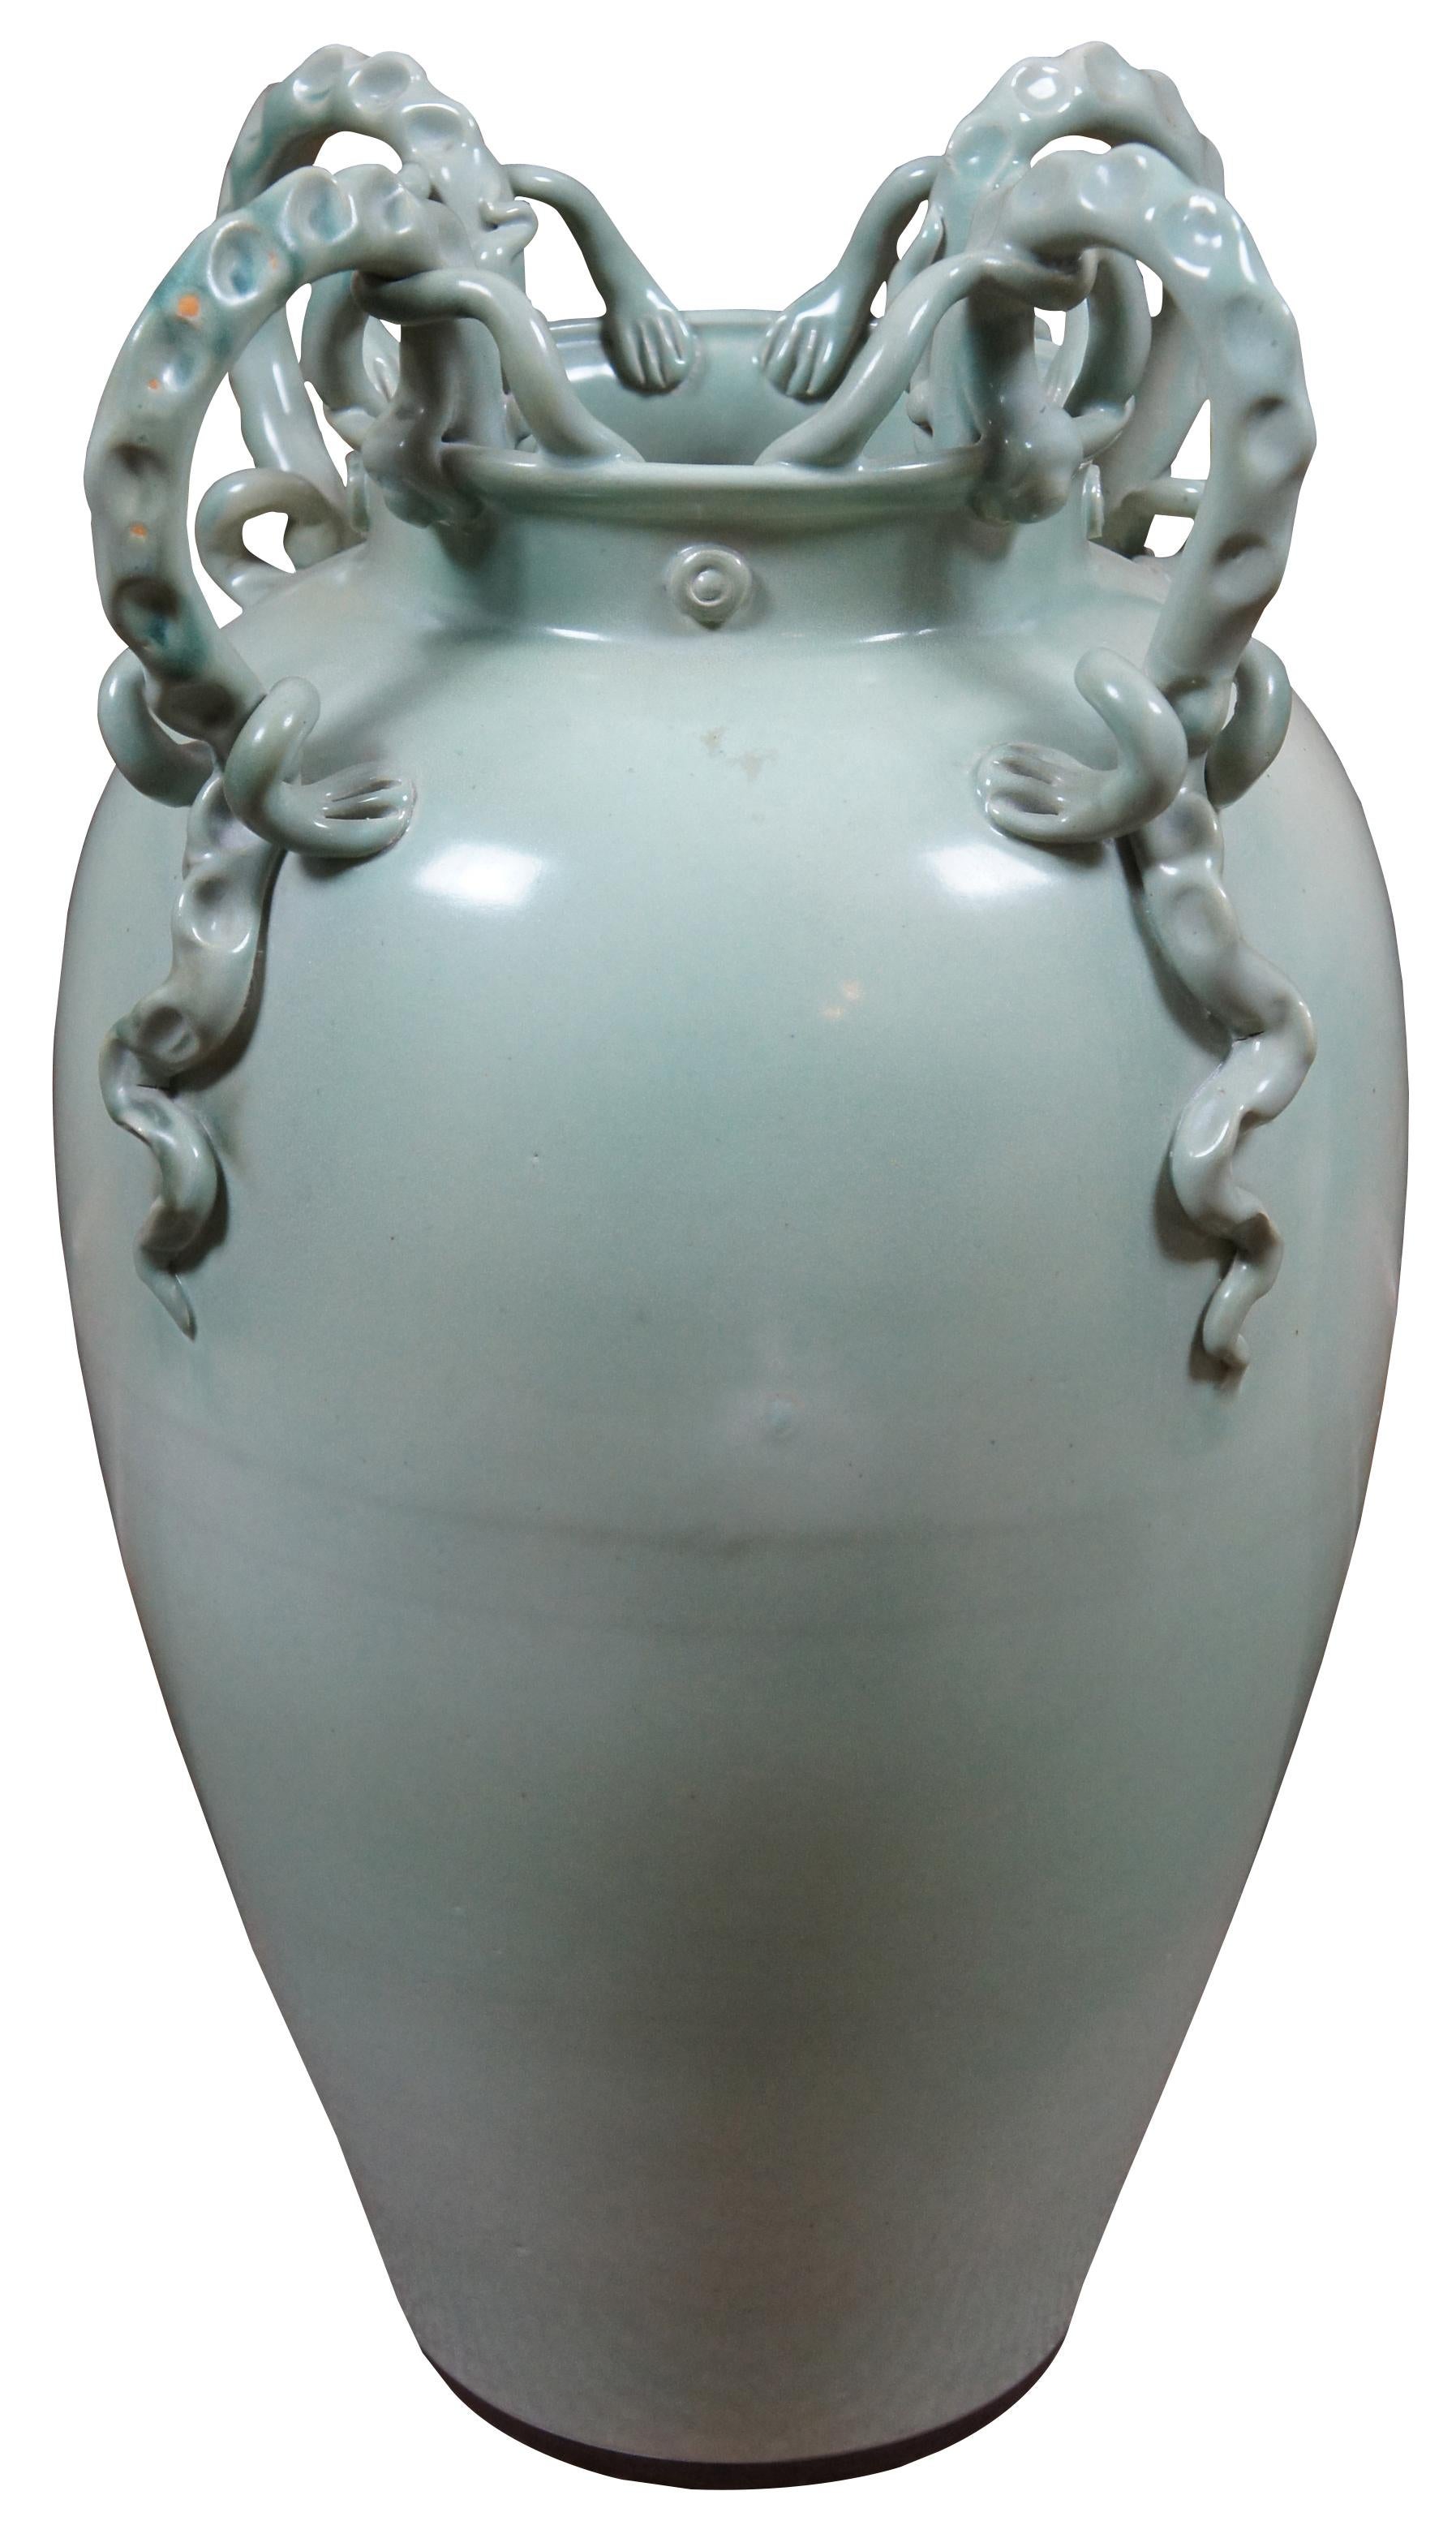 Vintage handmade Maitland-Smith floor vase or urn in celadon green with four lizard handles; signed on base.
 